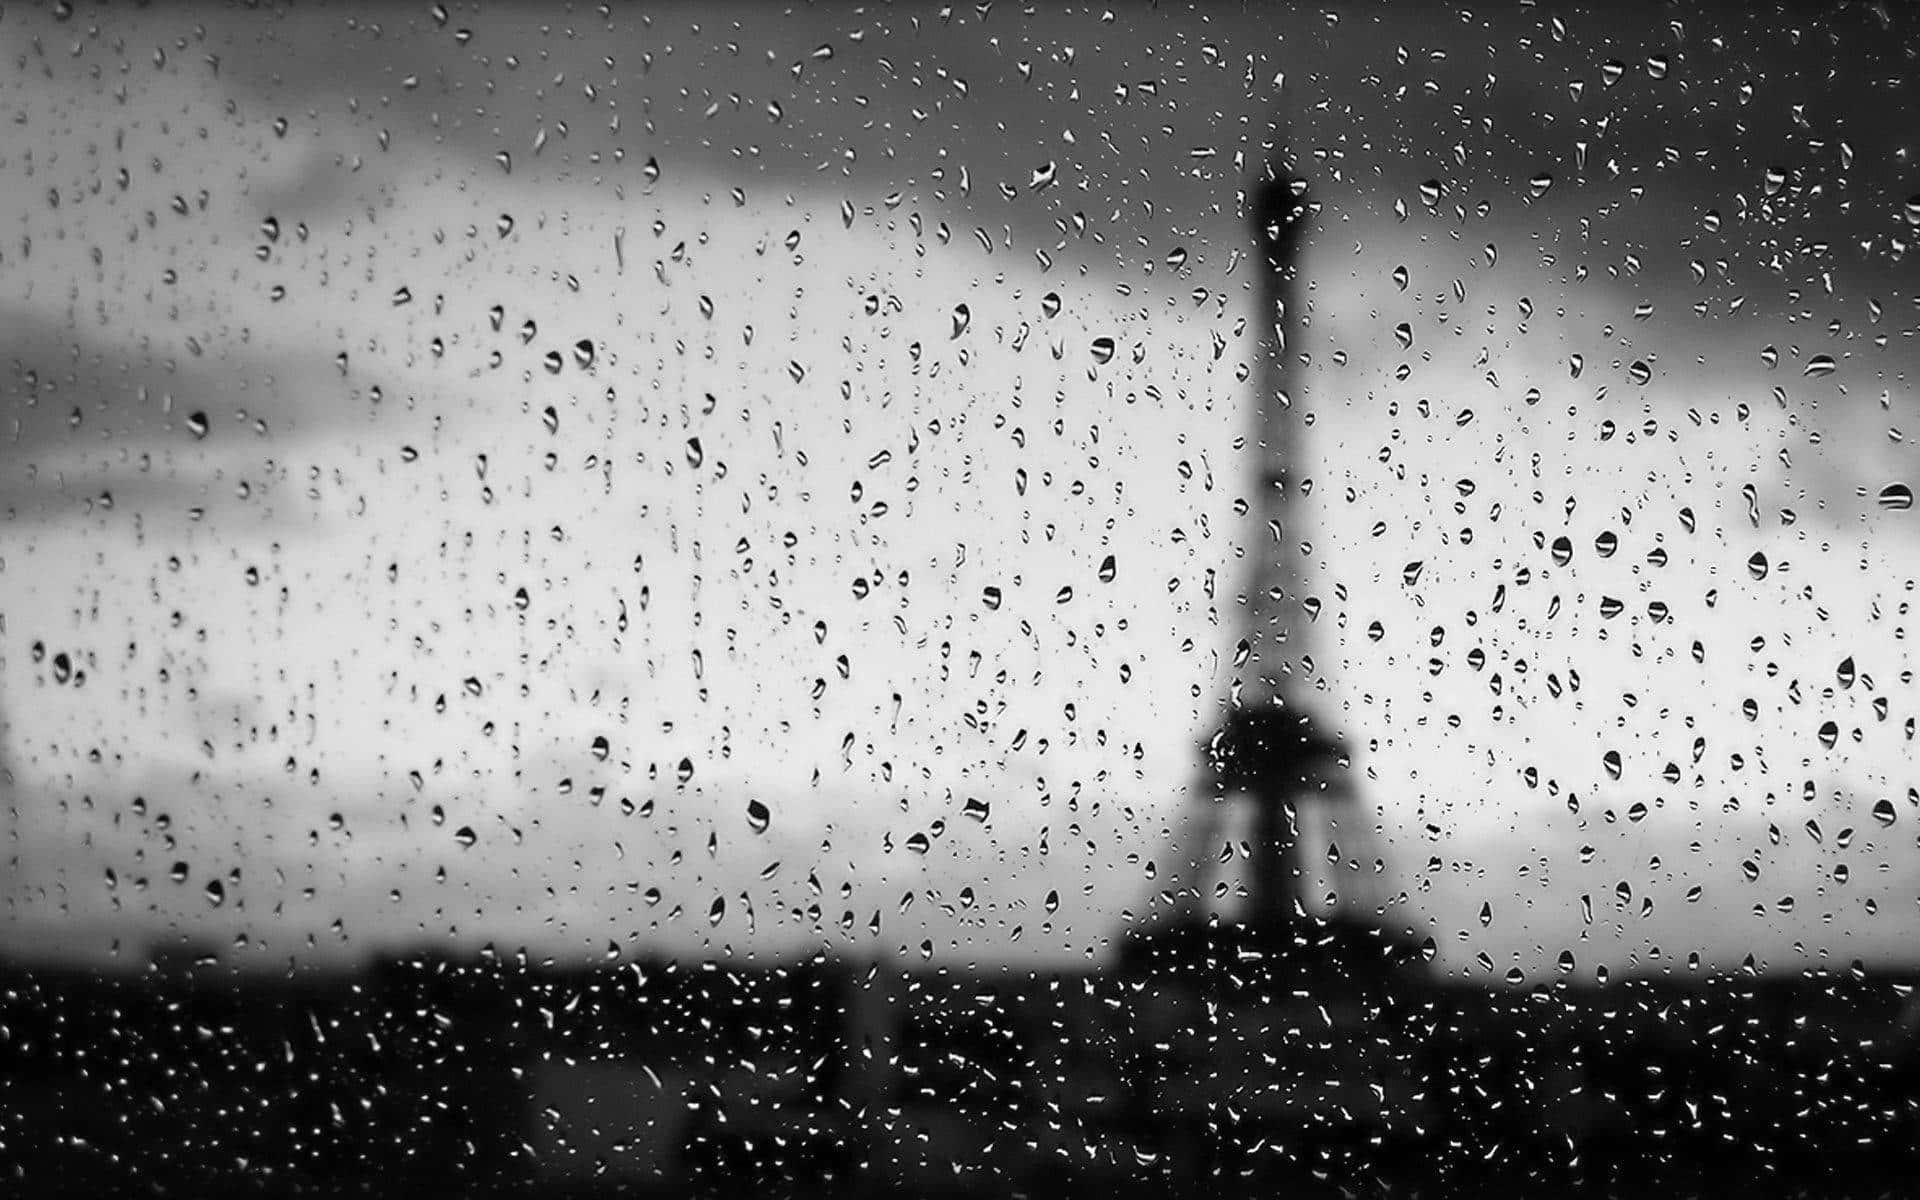 "The View From My Rainy Desktop" Wallpaper